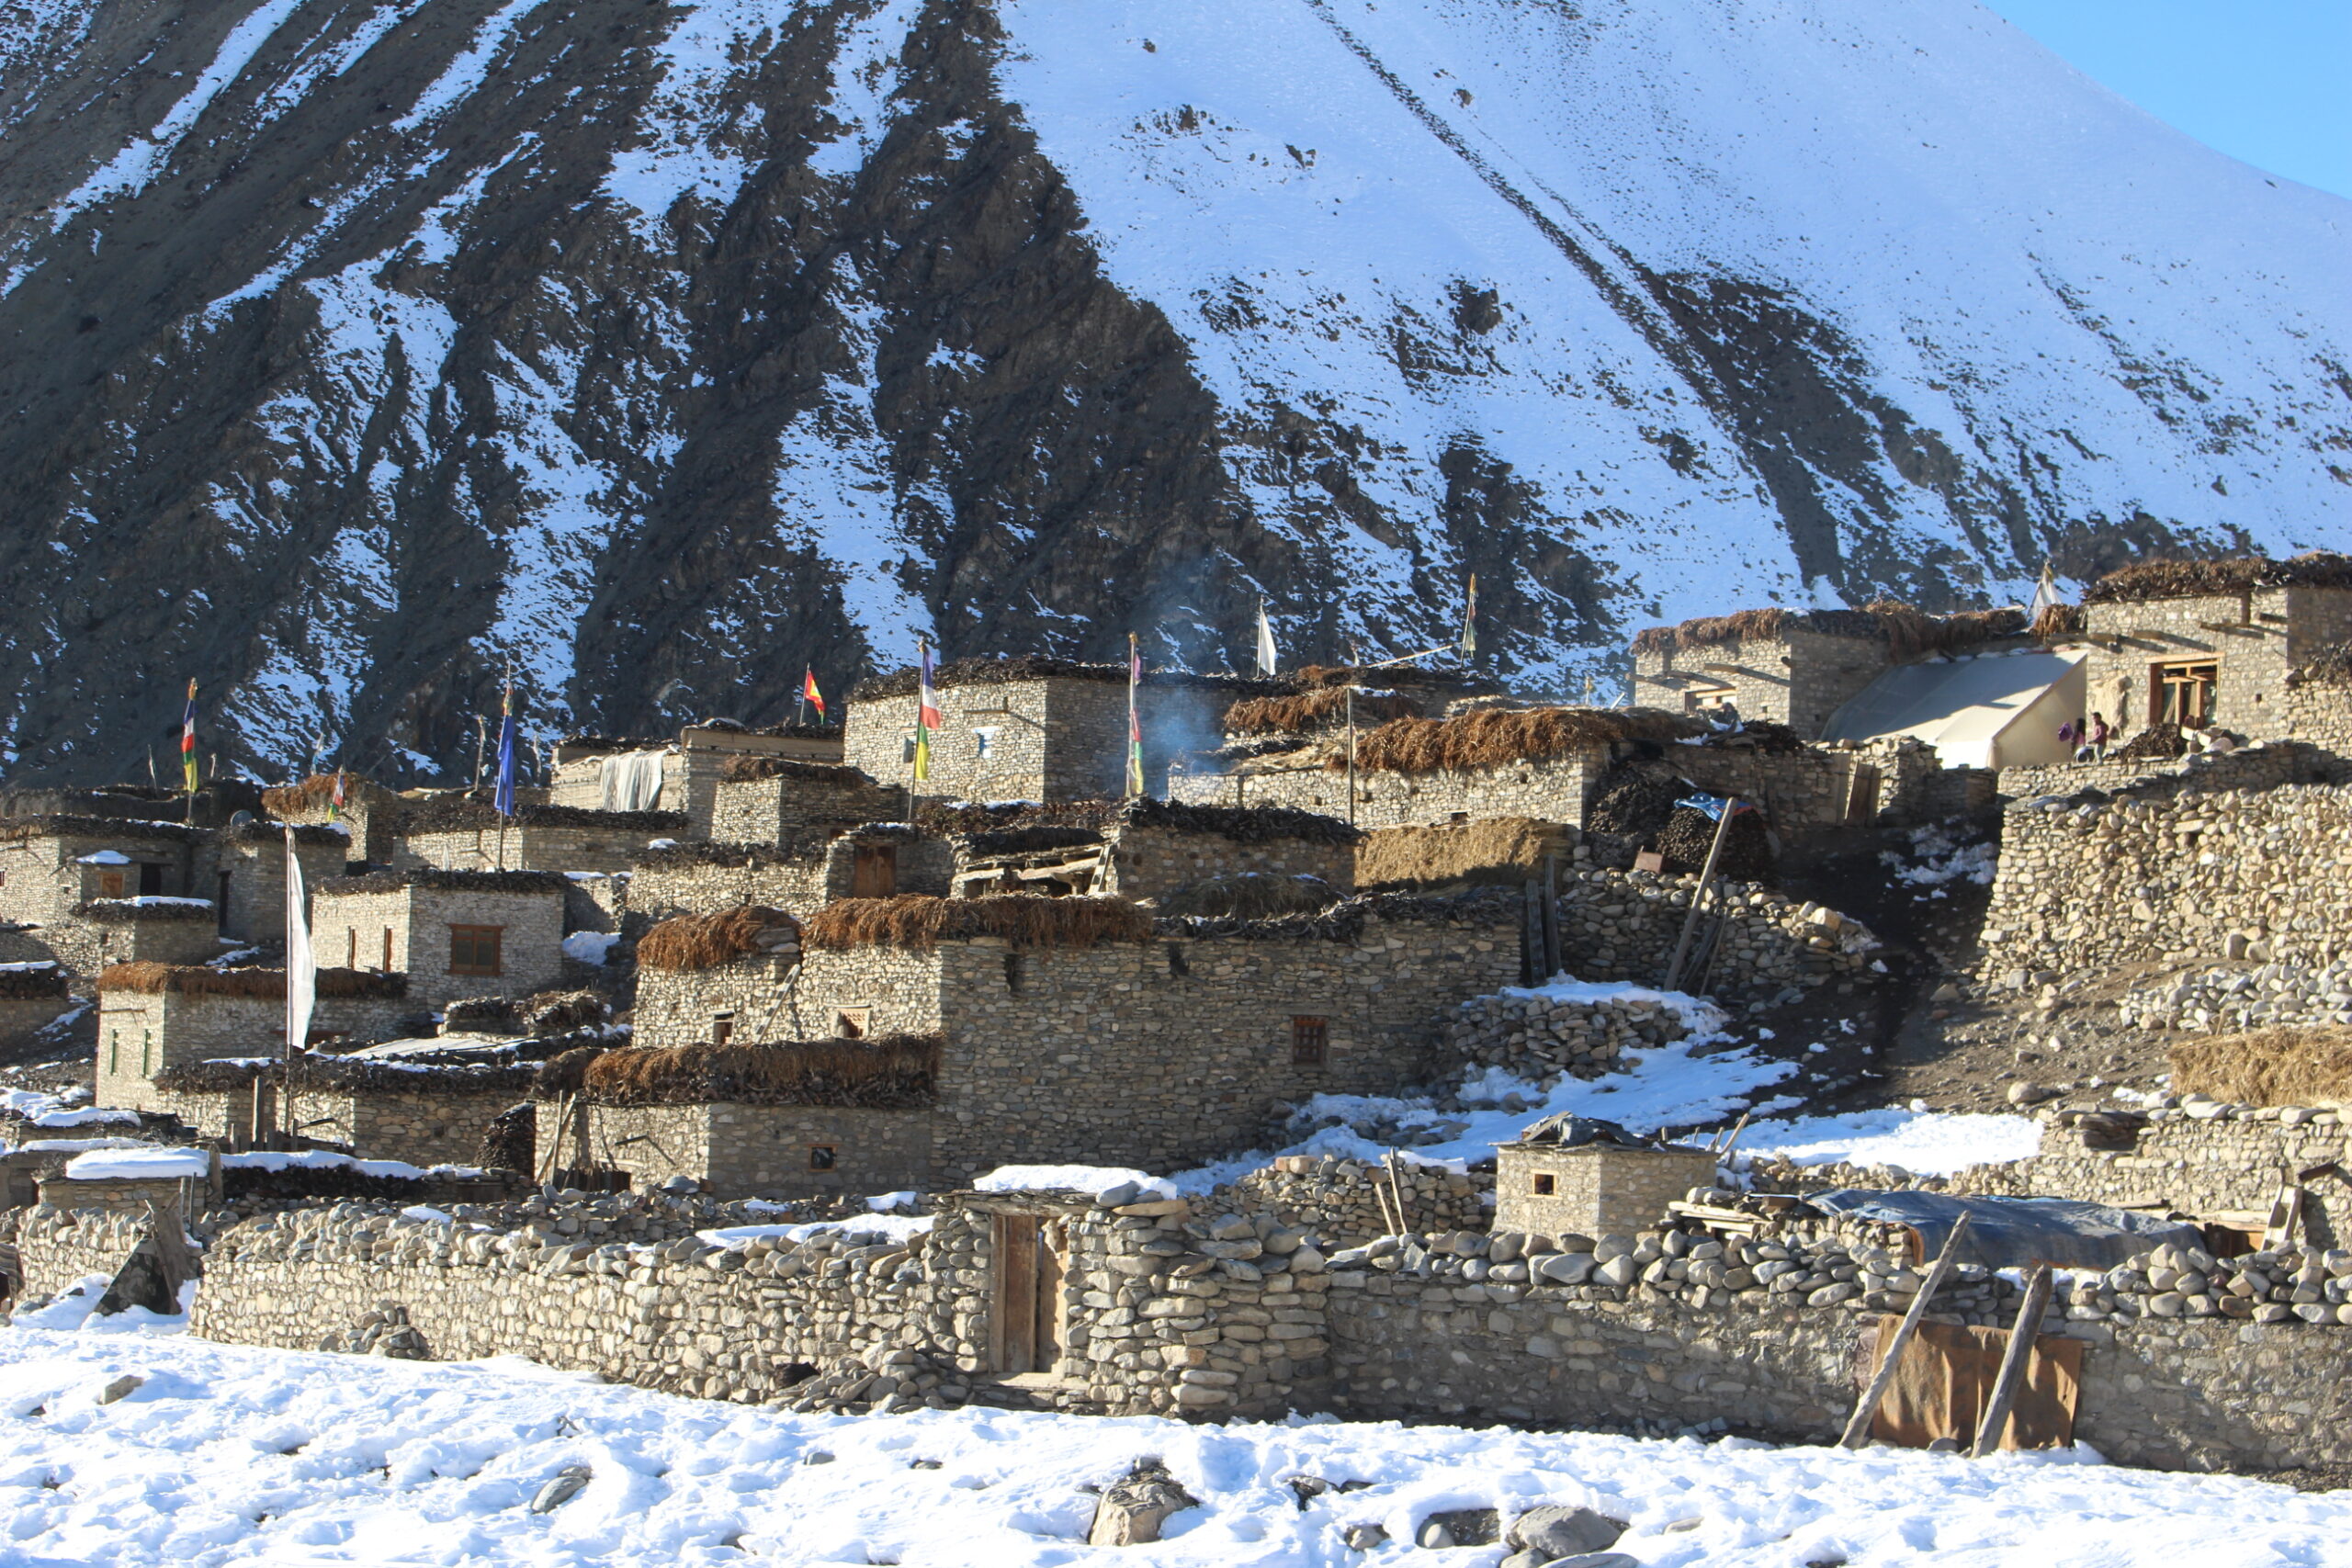 Dho village in the winter